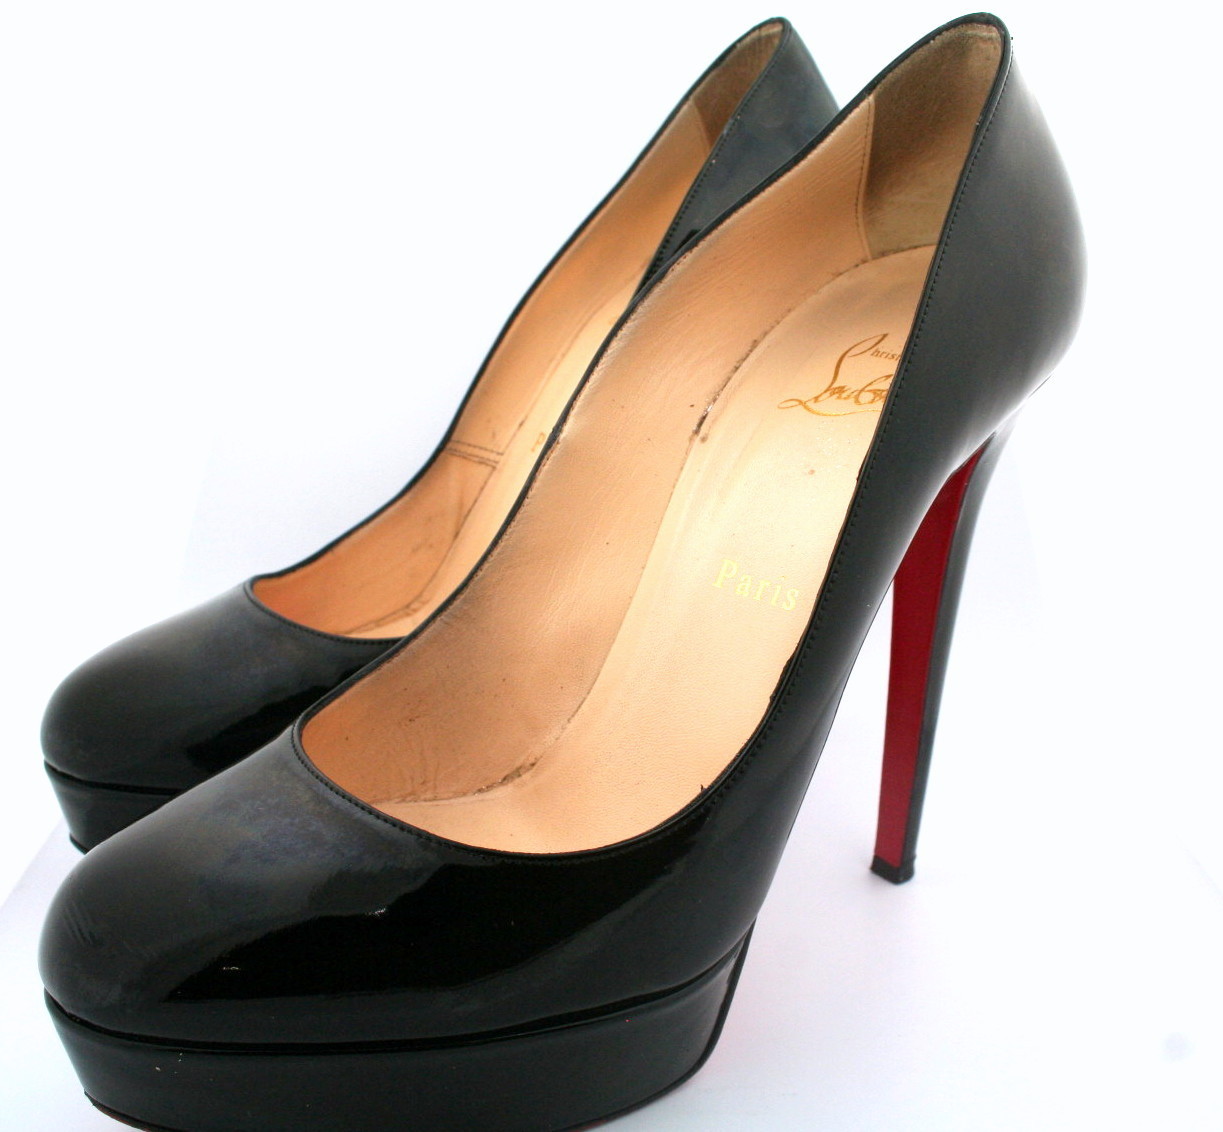 Long Heels, Red Bottoms: Louboutin are the Hottest Thing in